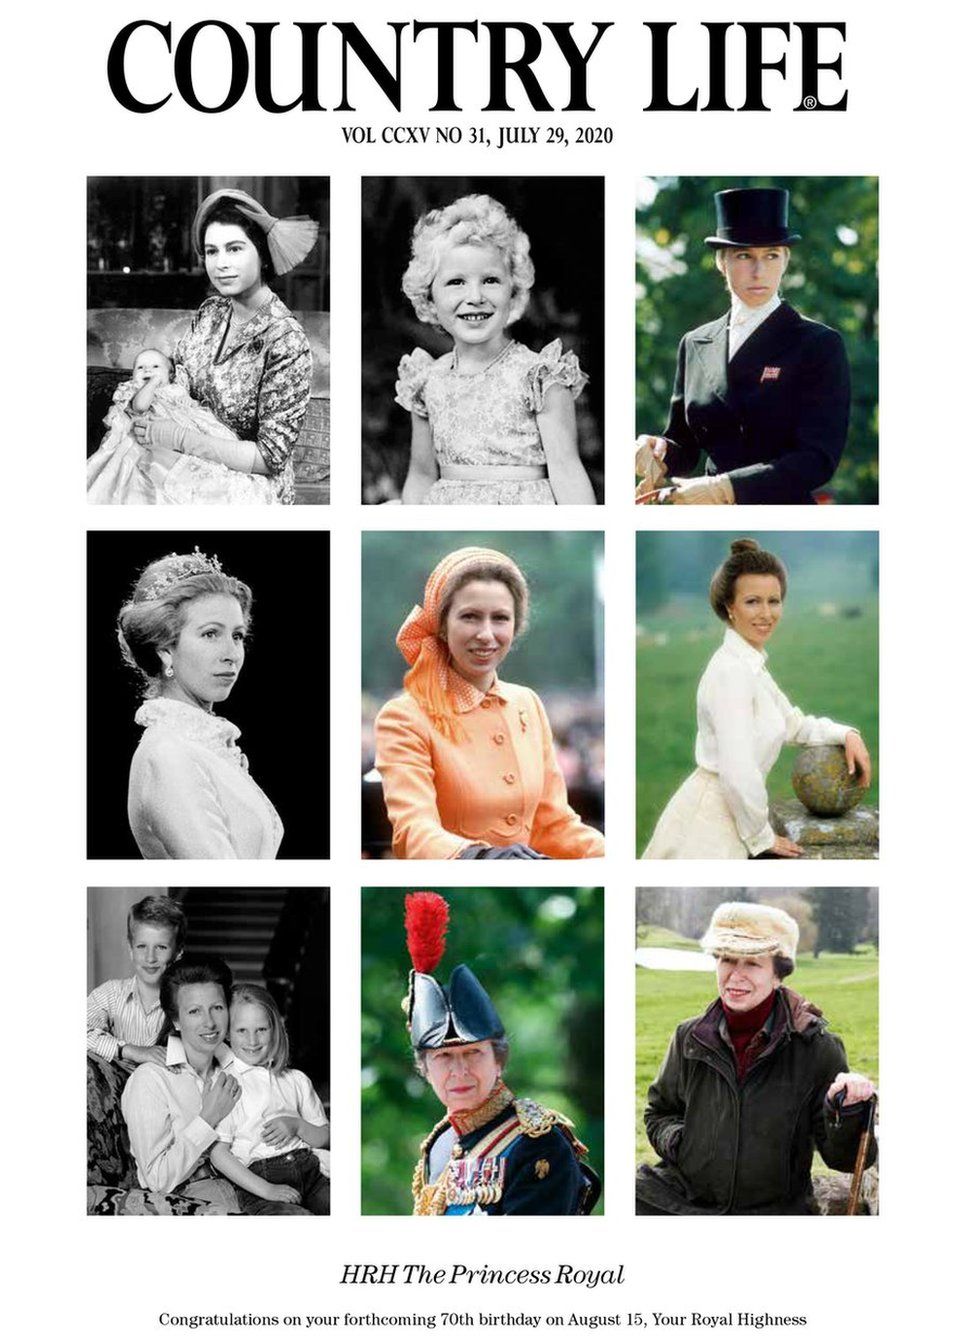 Country Life featuring pictures of Princess Anne over the years